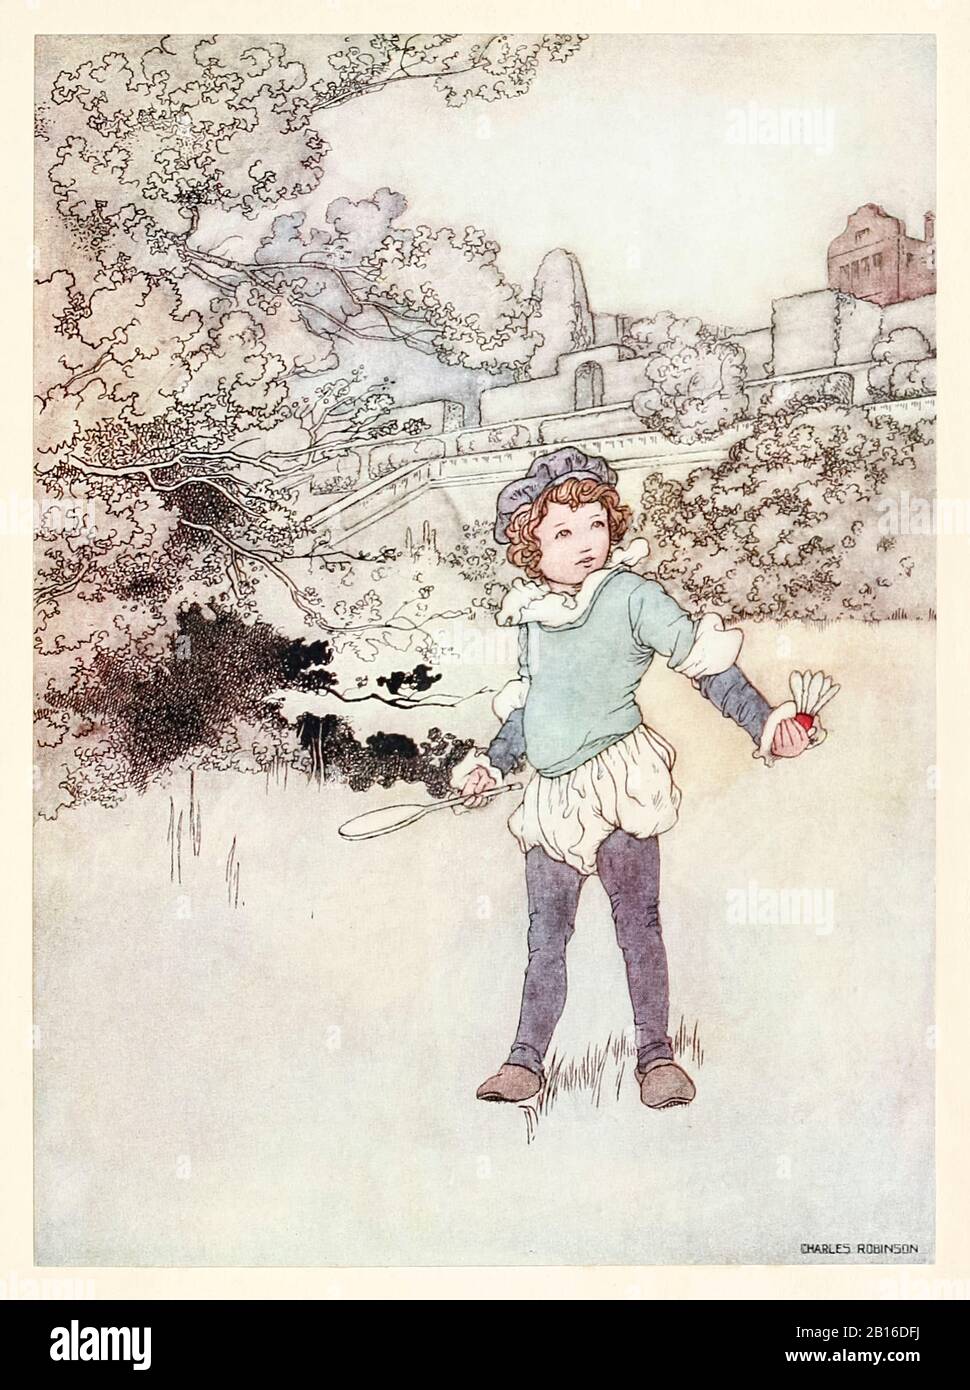 “This fair child of mine” frontispiece from ‘A Revival - When Forty Winters Shall Besiege Thy Brow’ in The Songs and Sonnets of William Shakespeare illustrated by Charles Robinson (1870-1937). See more information below. Stock Photo